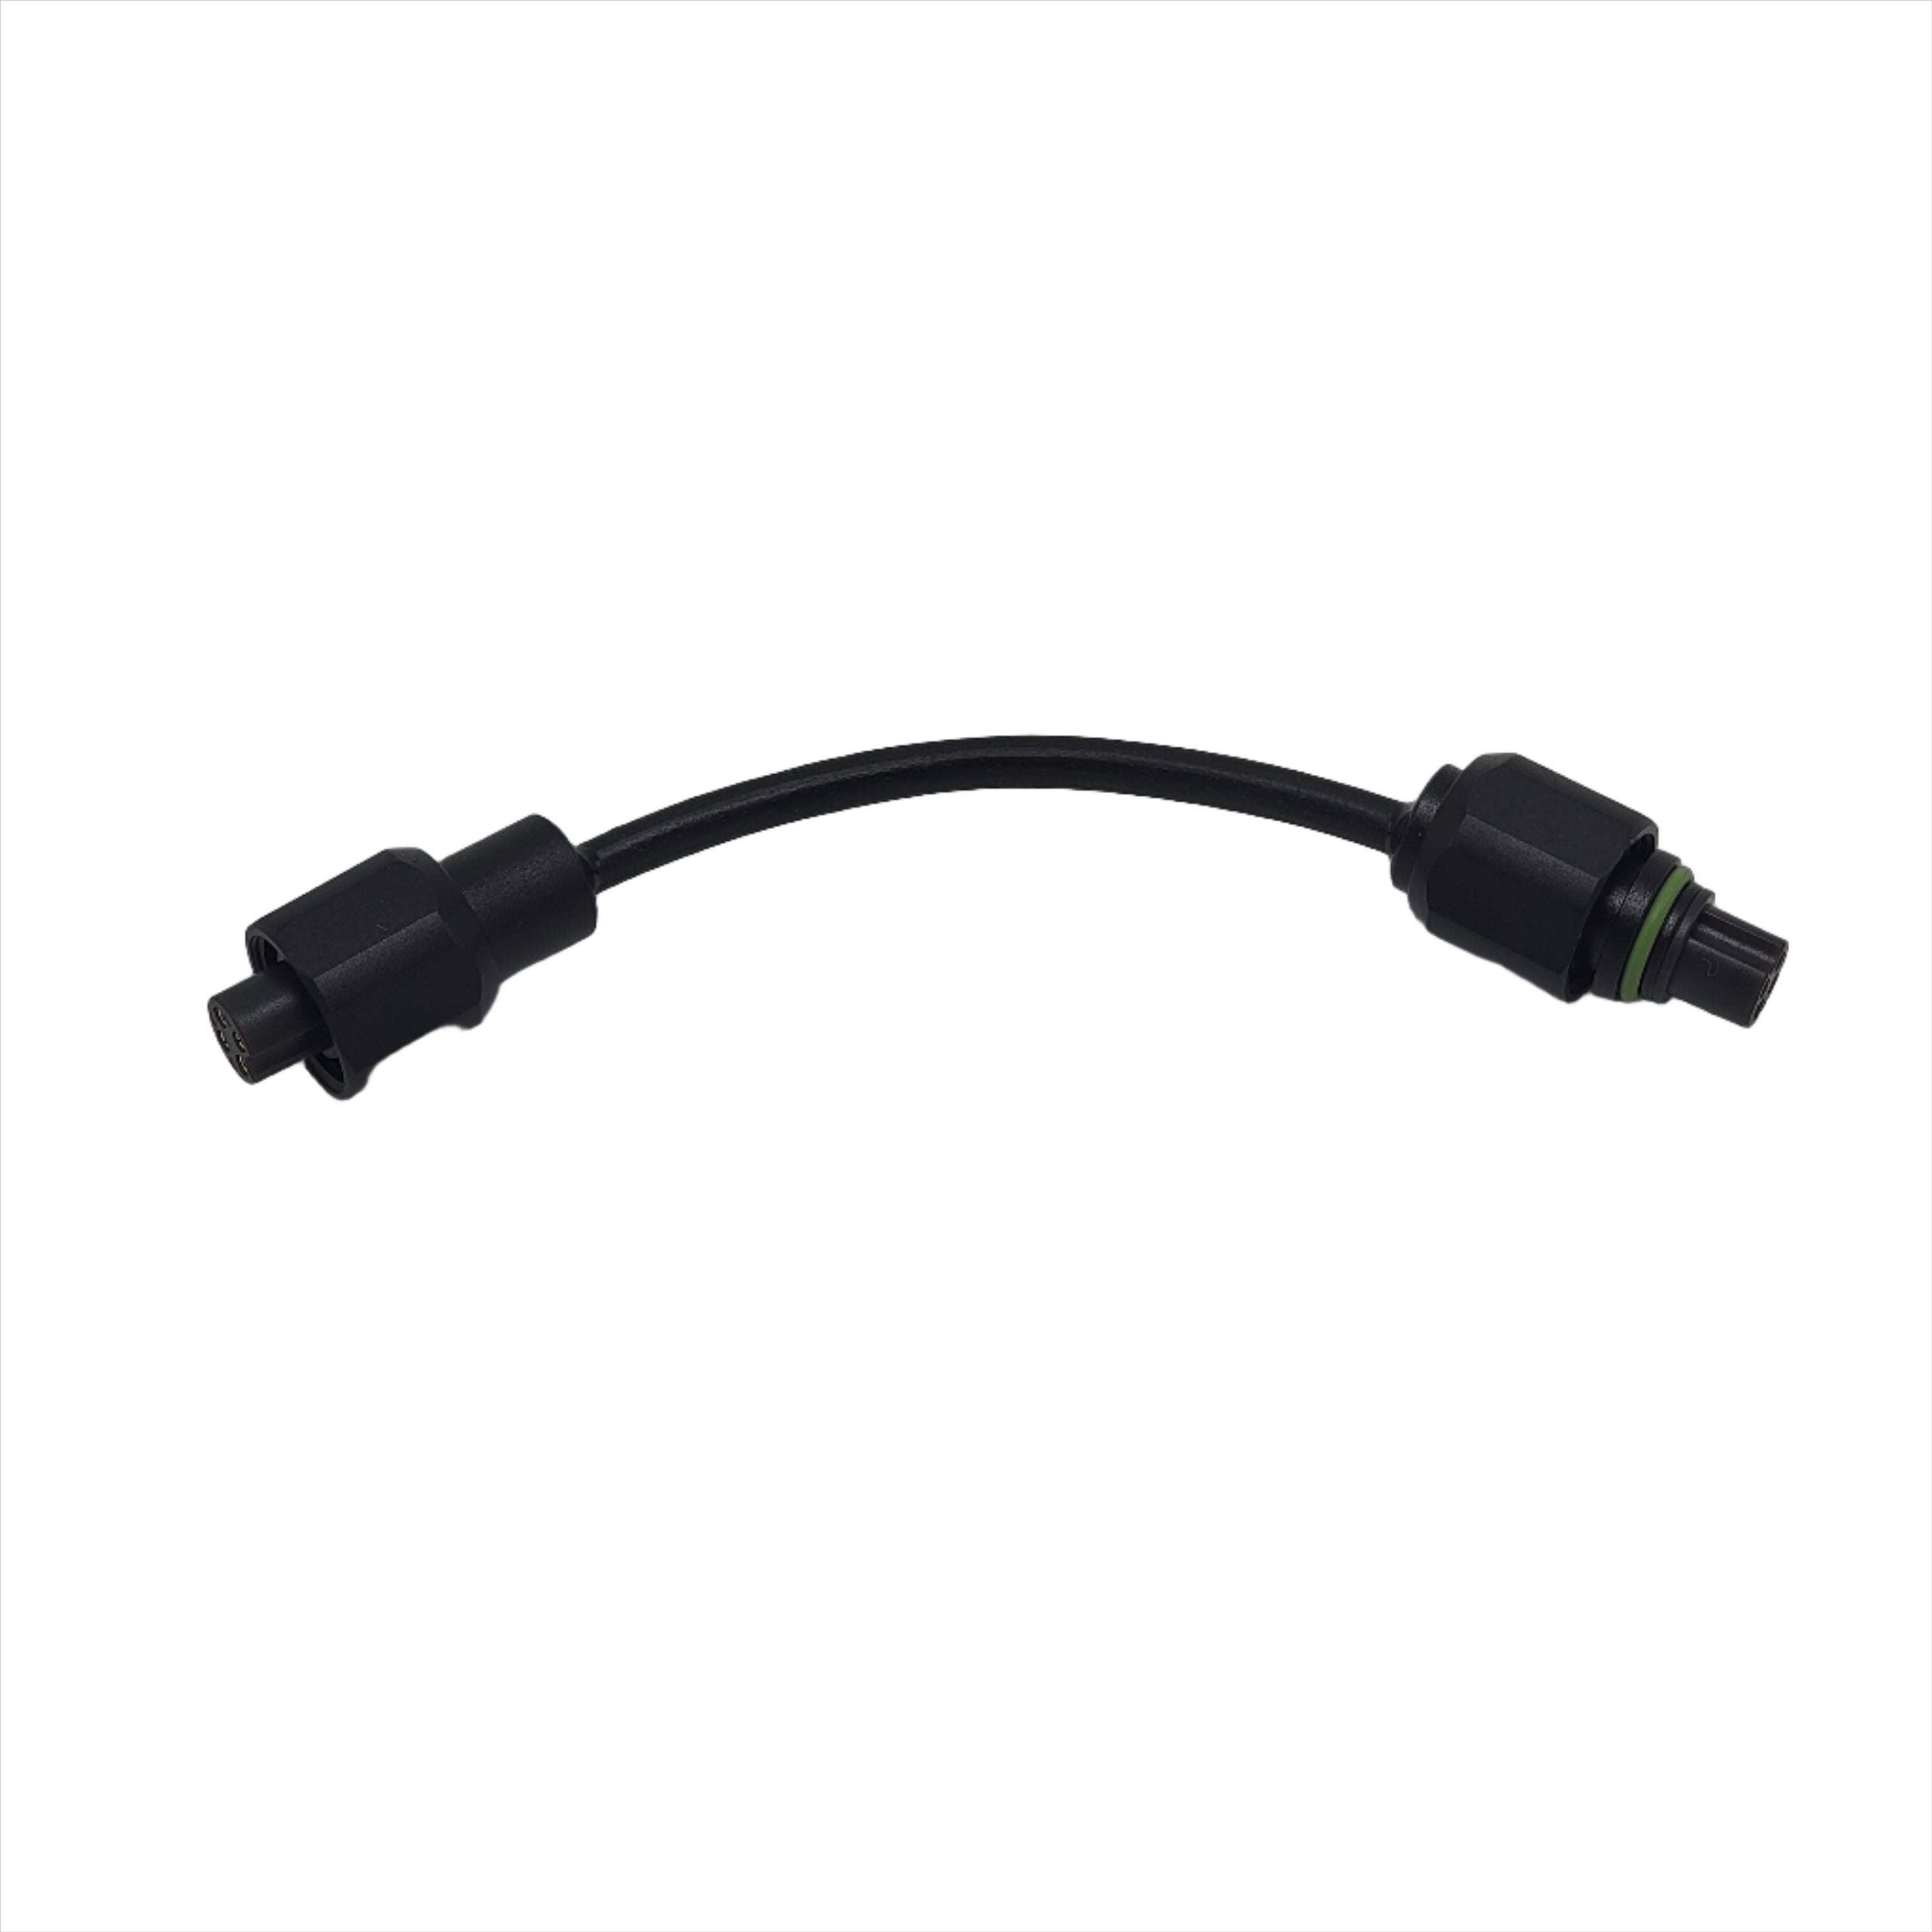 Chasing - M2/M2 Pro 4-pin connector cable